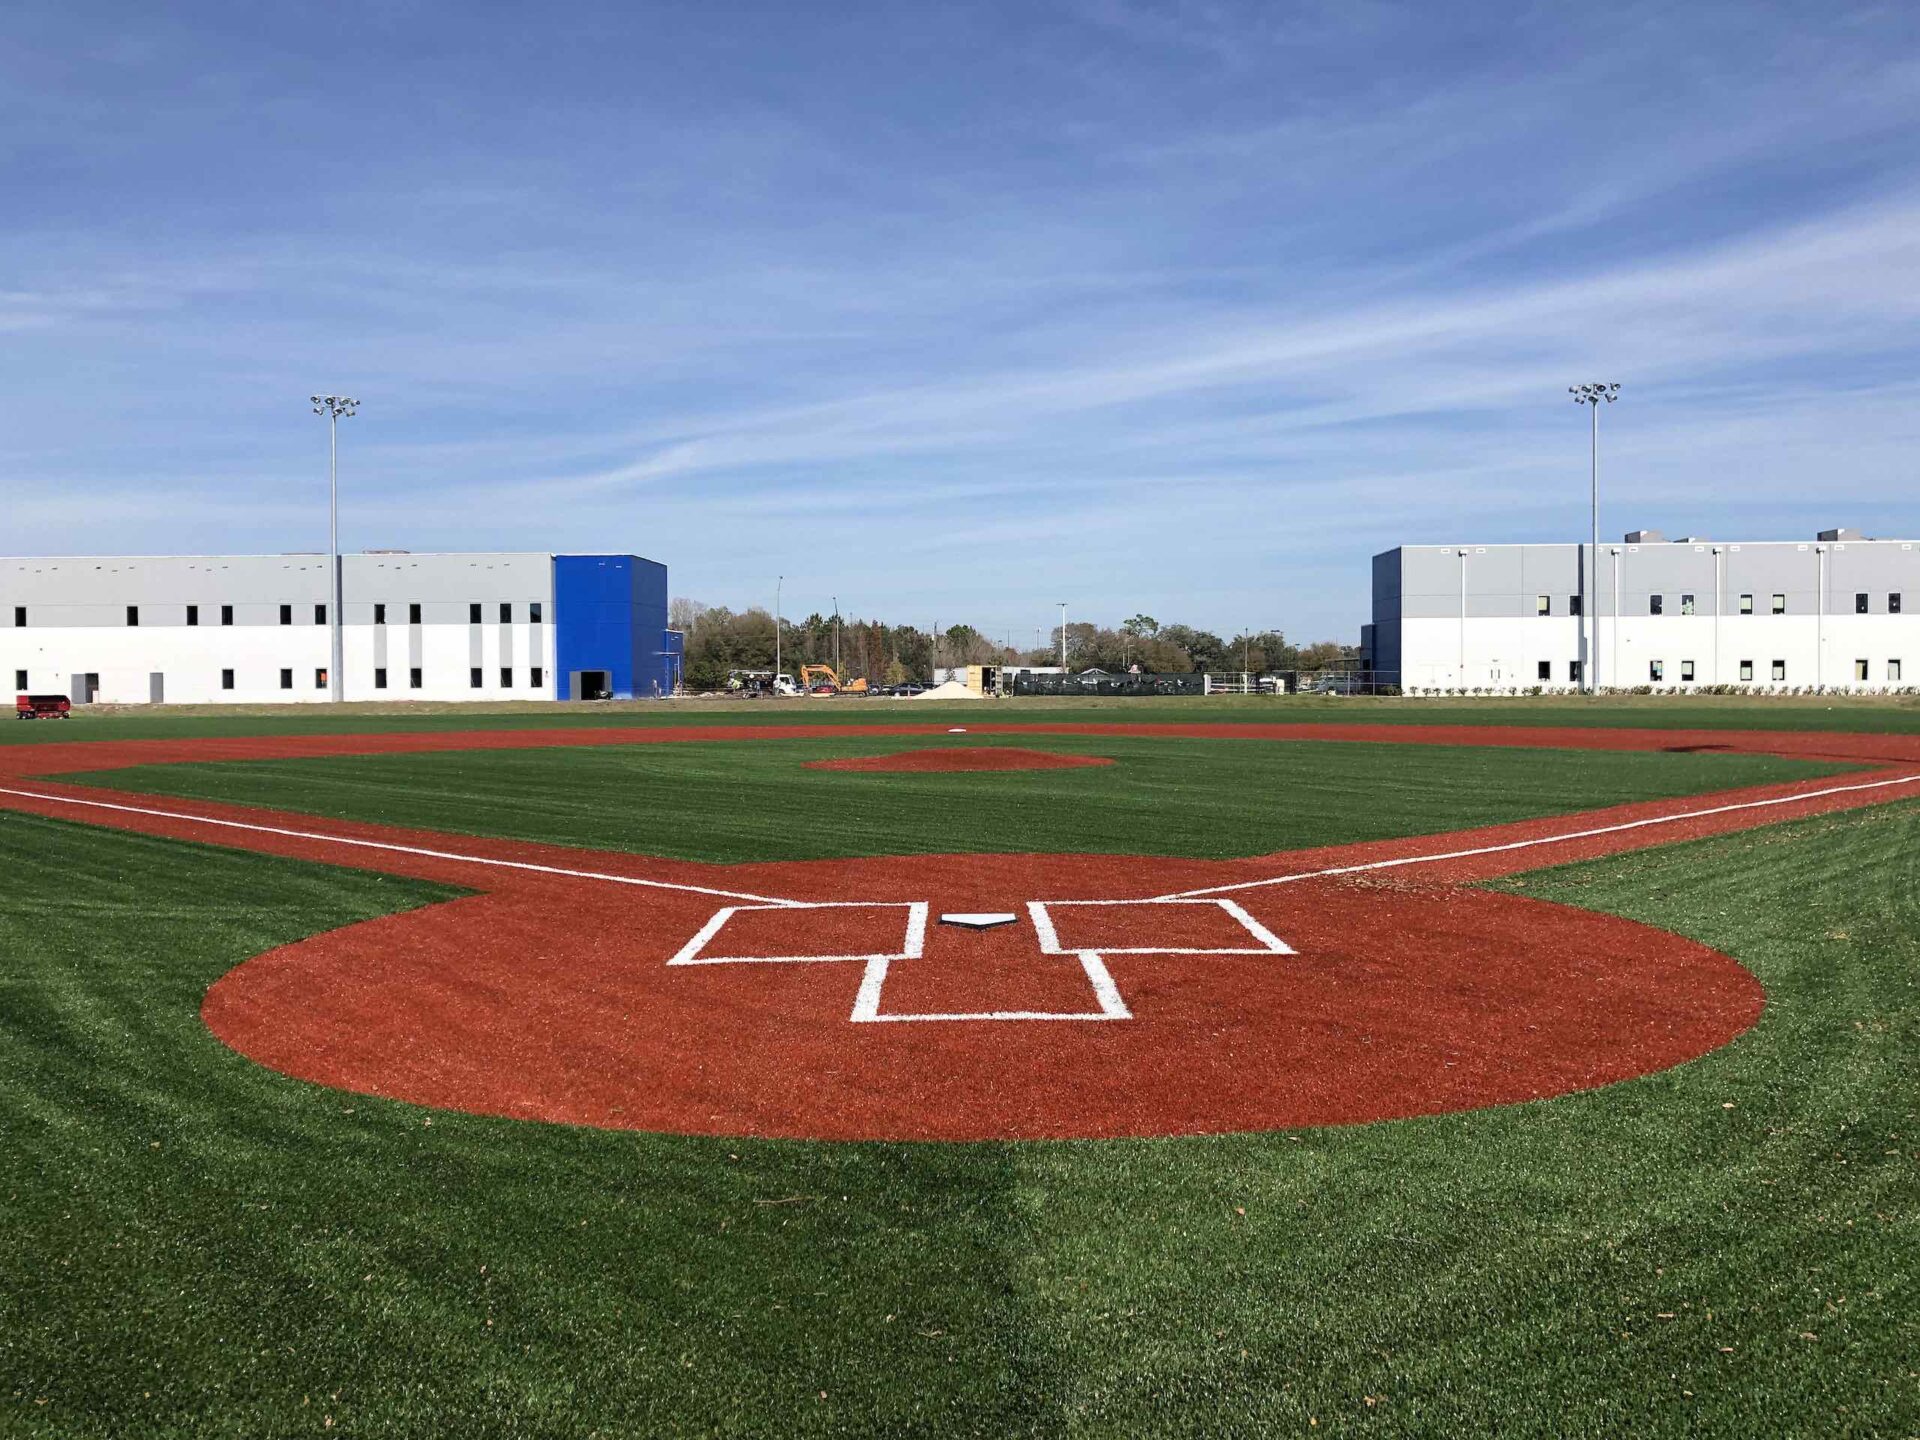 A pristine baseball field with red dirt infield, white chalk lines, and green outfield grass under a clear blue sky, flanked by large industrial buildings.